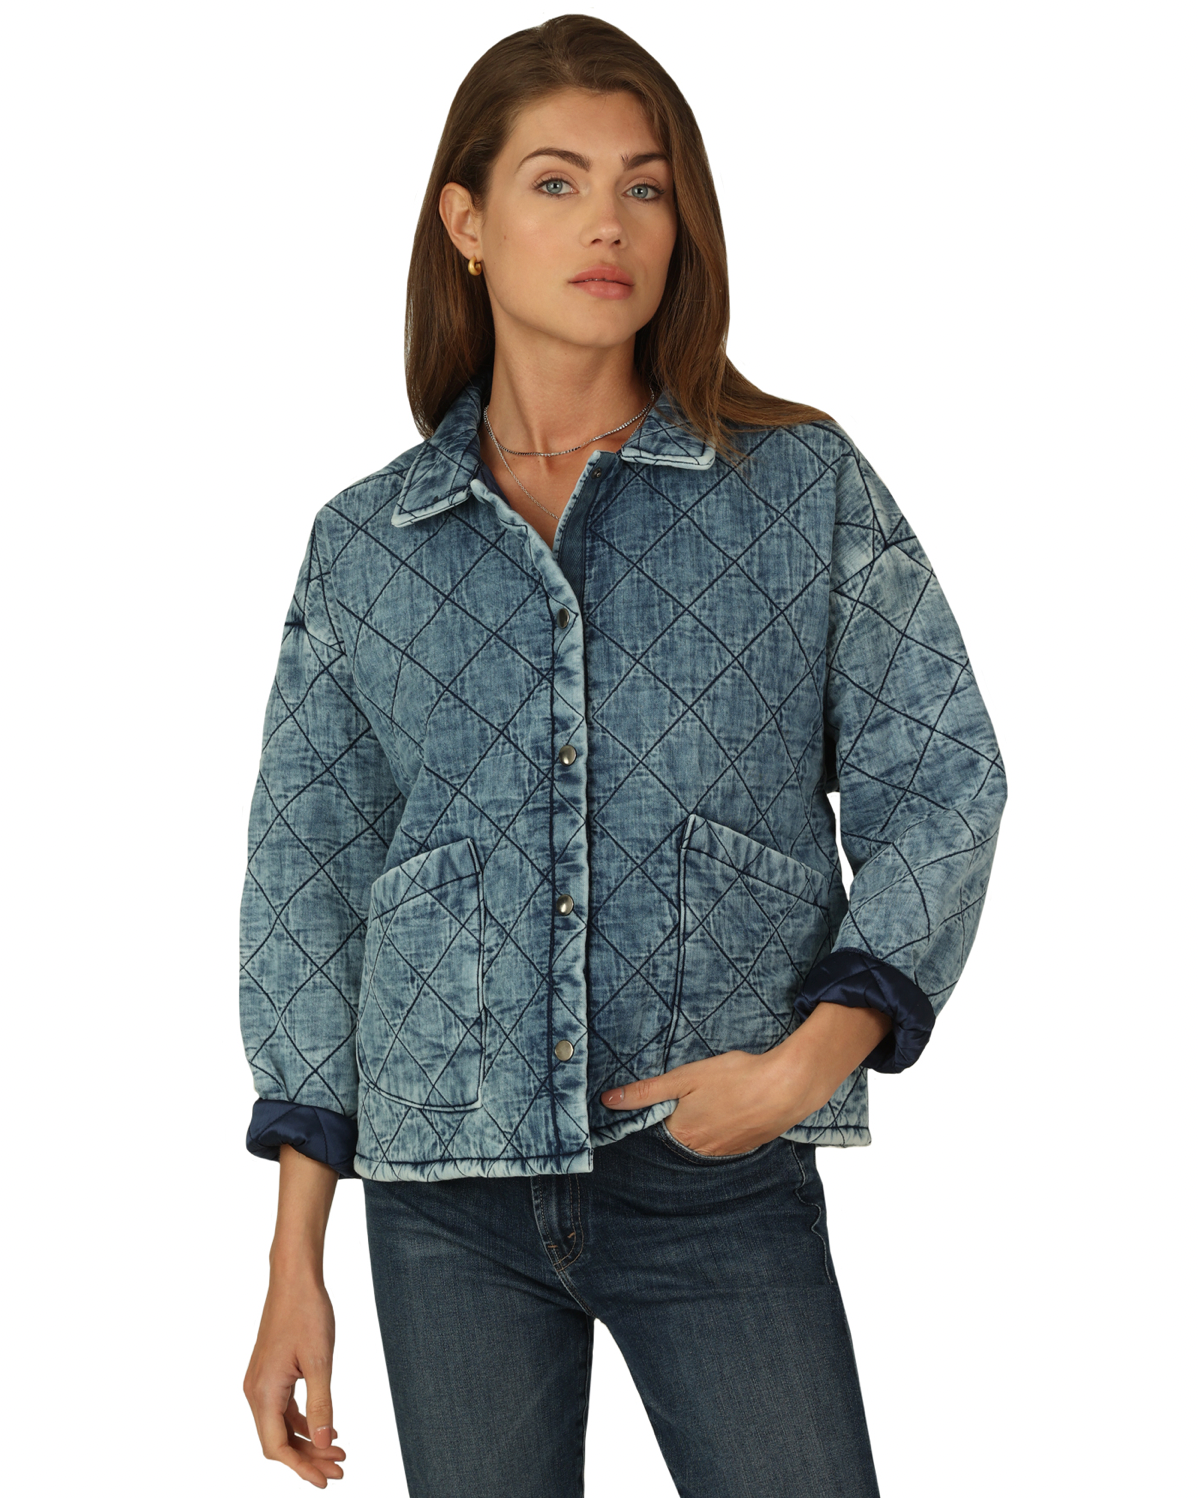 Model wearing Dylan claire Denim Quilted Jacket wearing jeans on a white background